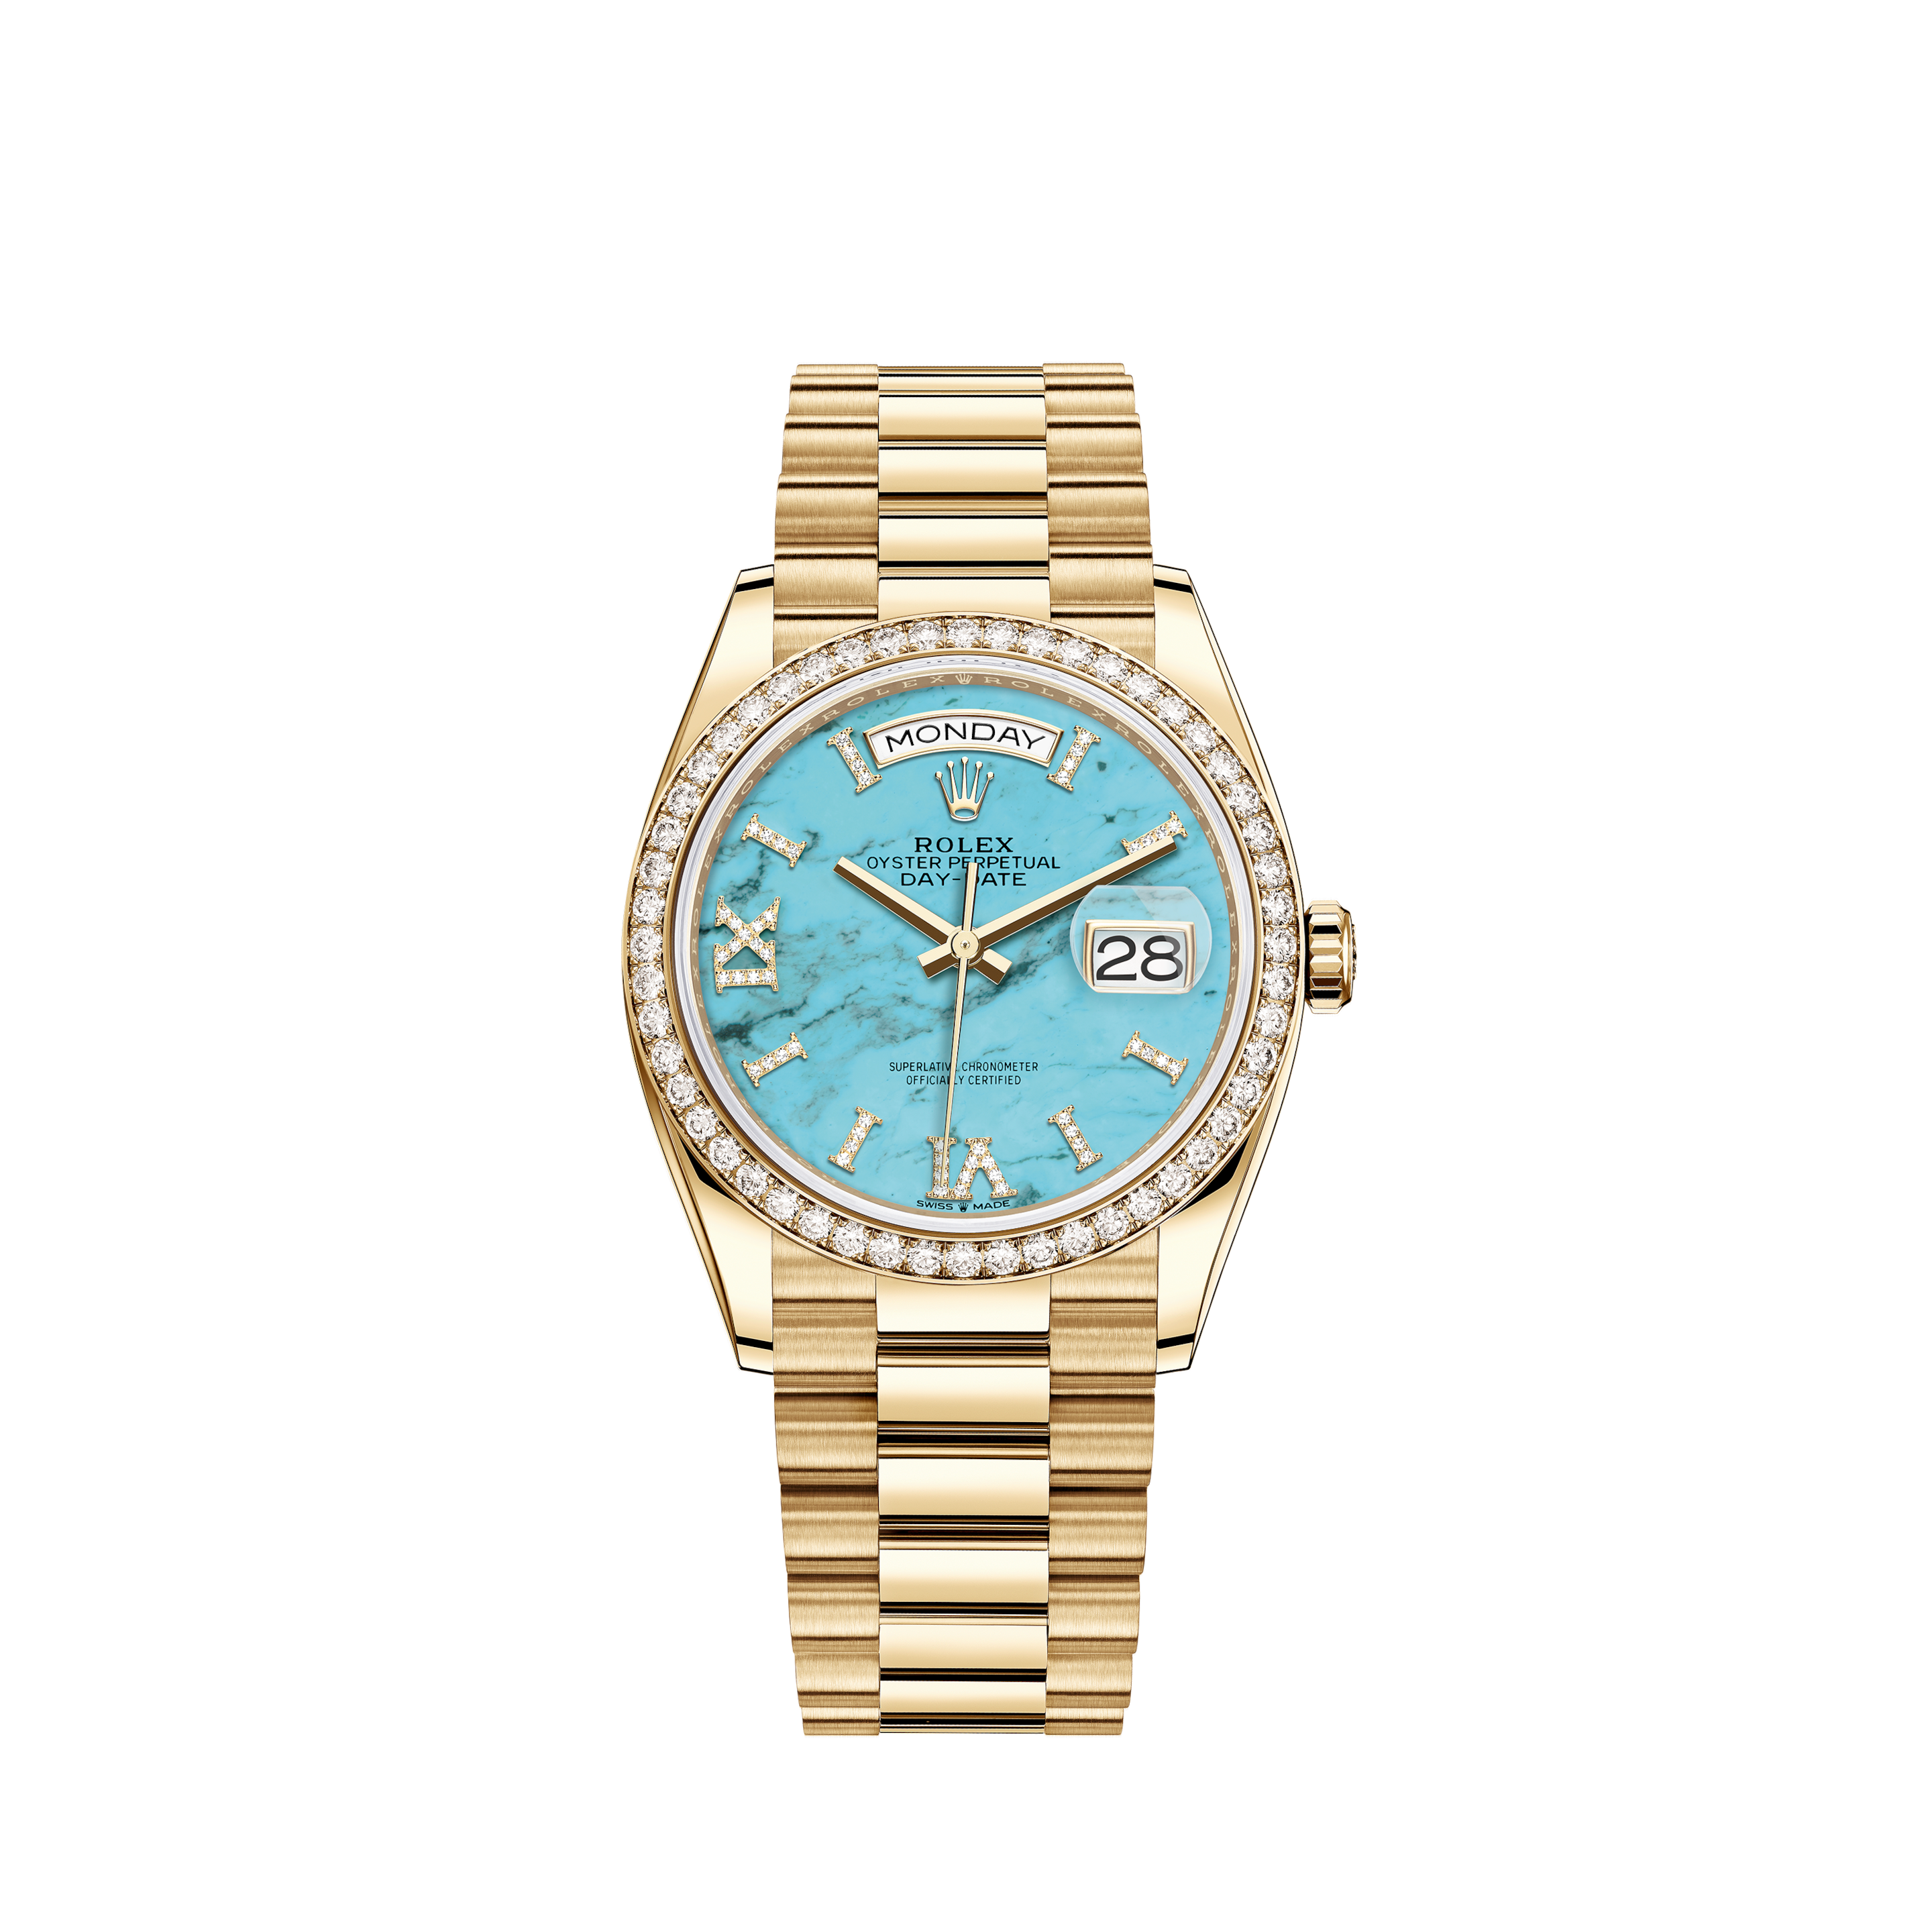 Rolex [204] K No. 2002 Parallel ROLEX Rolex Datejust 79174G Pink 10P Diamond Dial WG/SS White Gold Stainless Steel Automatic Date Display Women's Watches